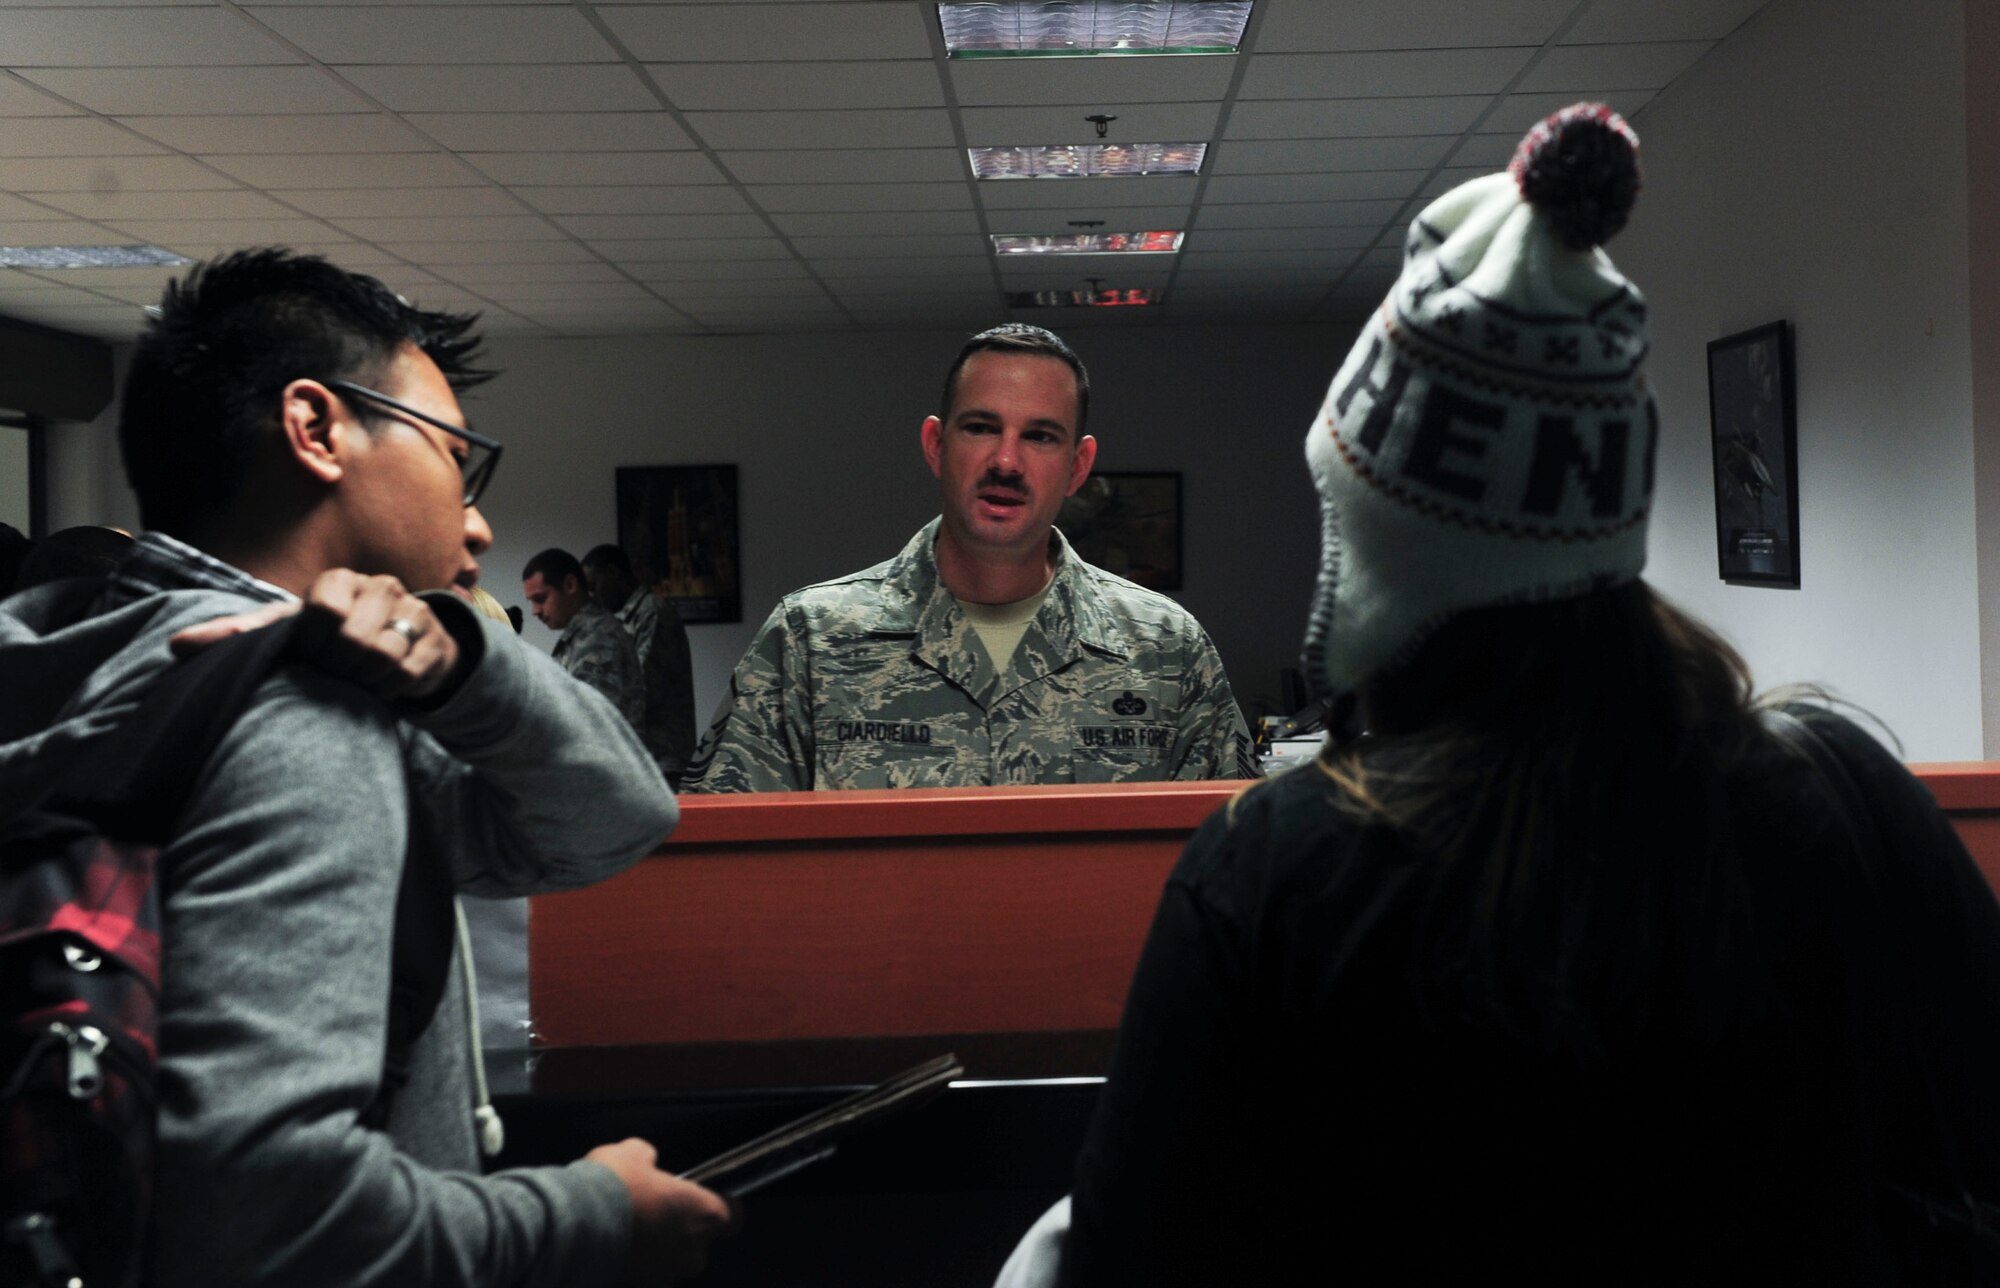 U.S. Air Force Master Sgt. Marc Ciardiello, 39th Air Base Wing legal office superintendent, speaks with U.S. Air Force Staff Sgt. Bryant Guillermo, 39th Security Forces Squadron NCO in-charge of investigation, and his wife at the processing center during the Department of State ordered departure March 30, 2016 at Incirlik Air Base, Turkey. The directed departure was conducted in close coordination with the Department of State and the Government of Turkey to ensure the safe transition of U.S. citizens from Incirlik Air Base and elsewhere in Turkey. (U.S. Air Force photo by Staff Sgt. Eboni Reams/Released)